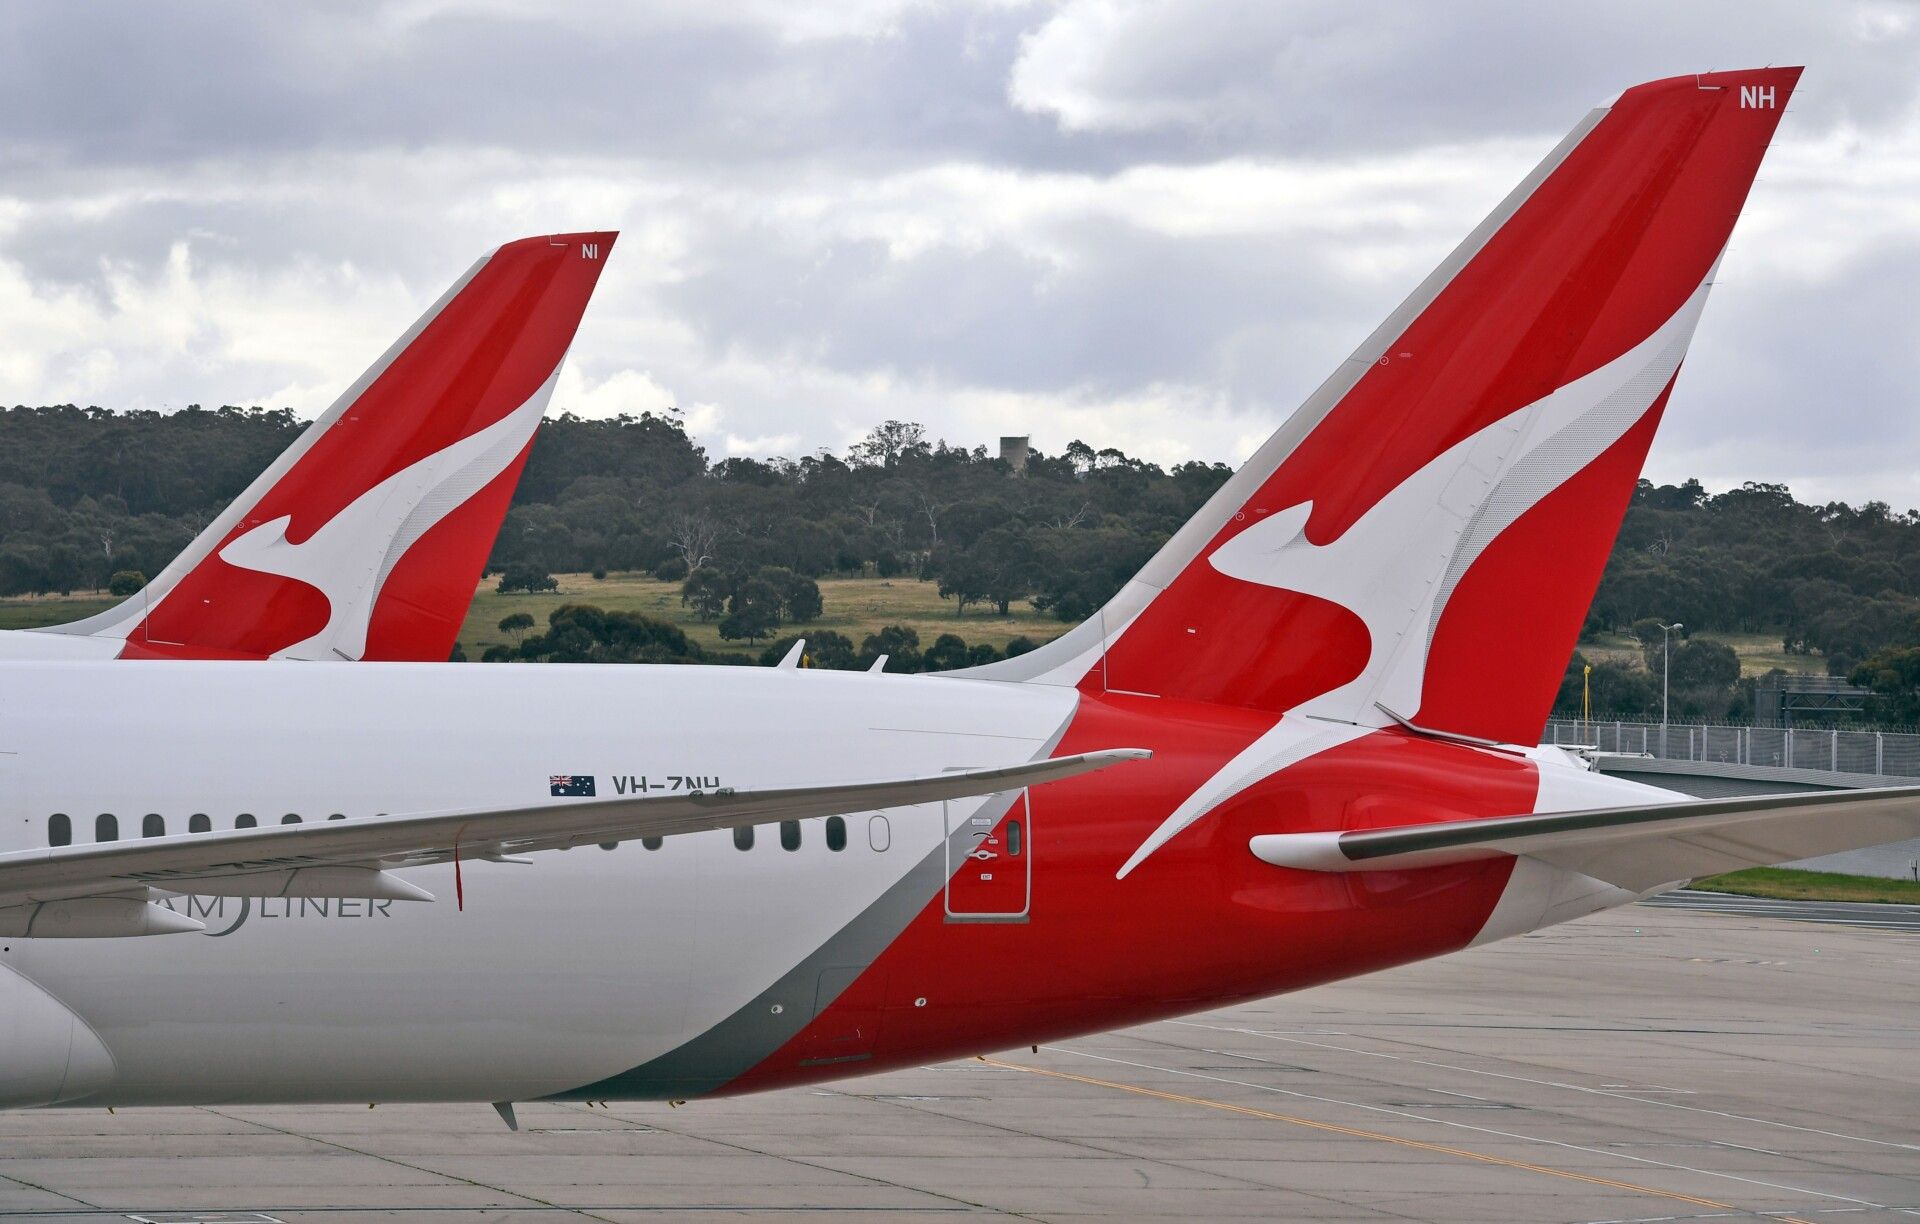 Qantas will offer a range of routes available to redeem Qantas points